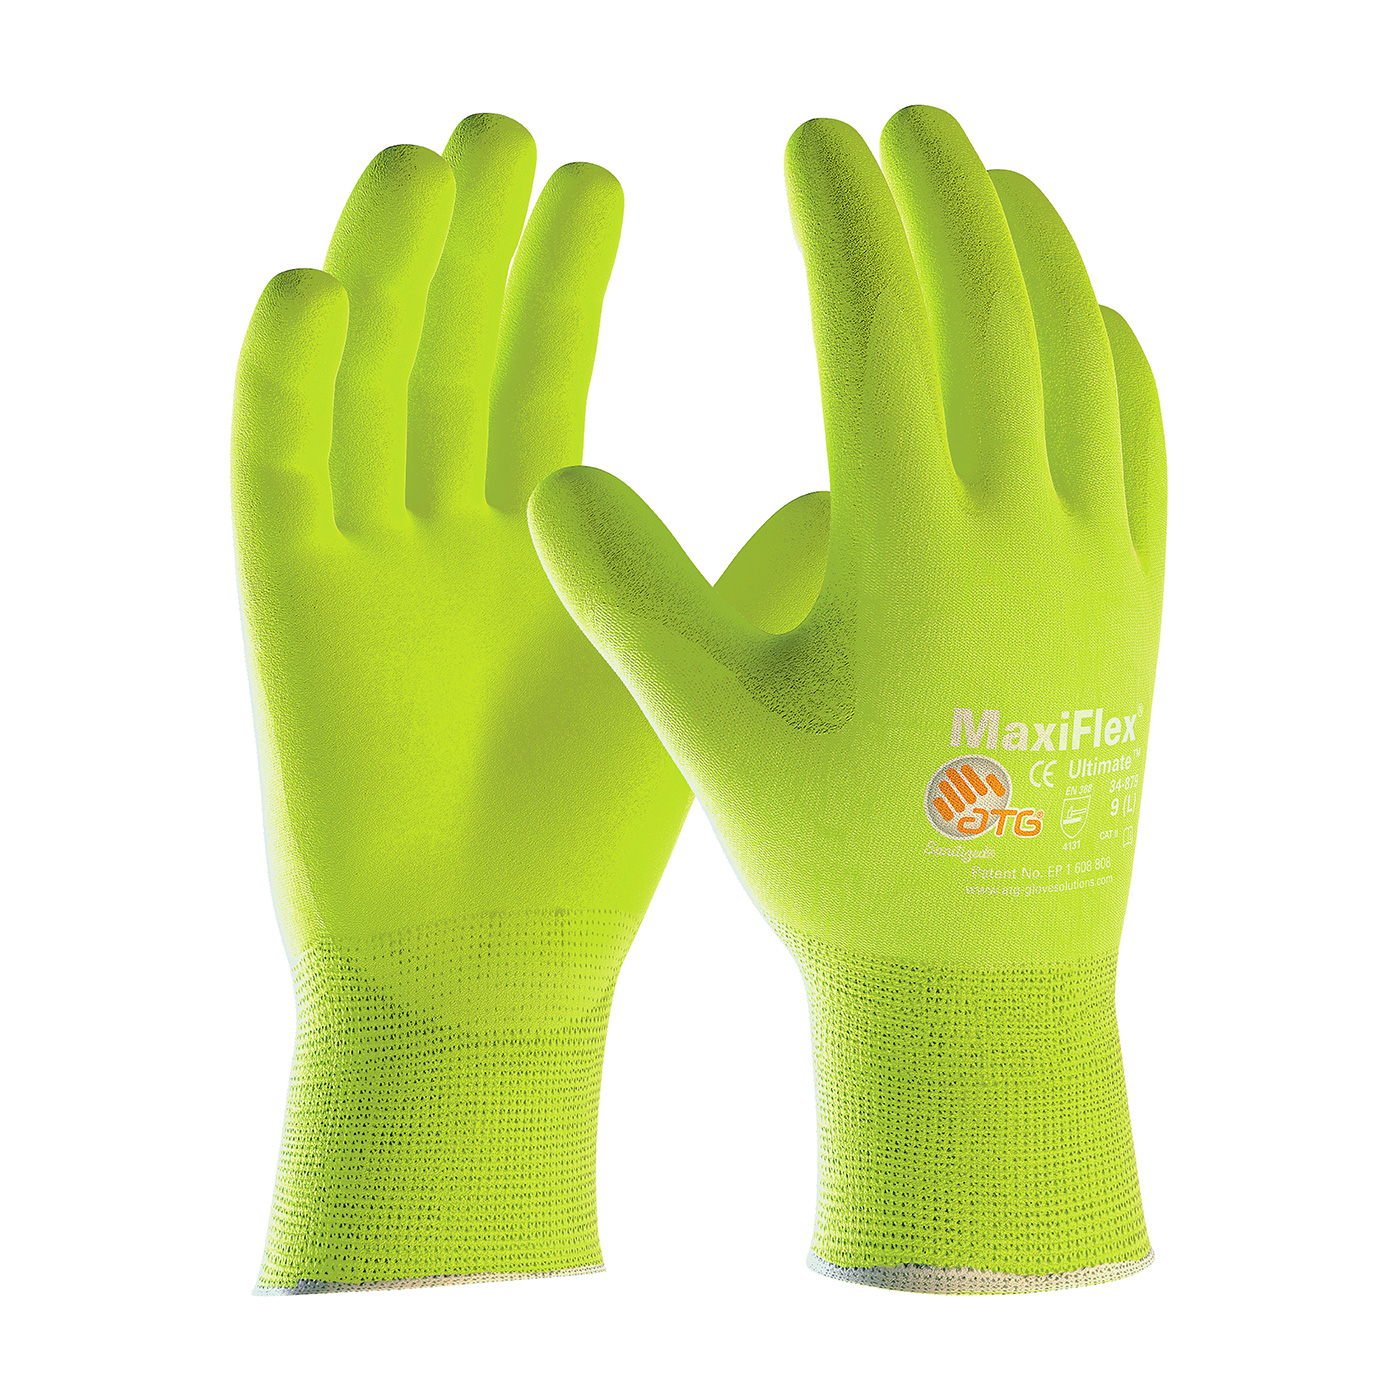 PIP 34-874FY/XL MaxiFlex Ultimate Hi-Vis Seamless Knit Nylon/Lycra Glove with Nitrile Coated MicroFoam Grip on Palm & Fingers - X-Large PID-34 874FY XL